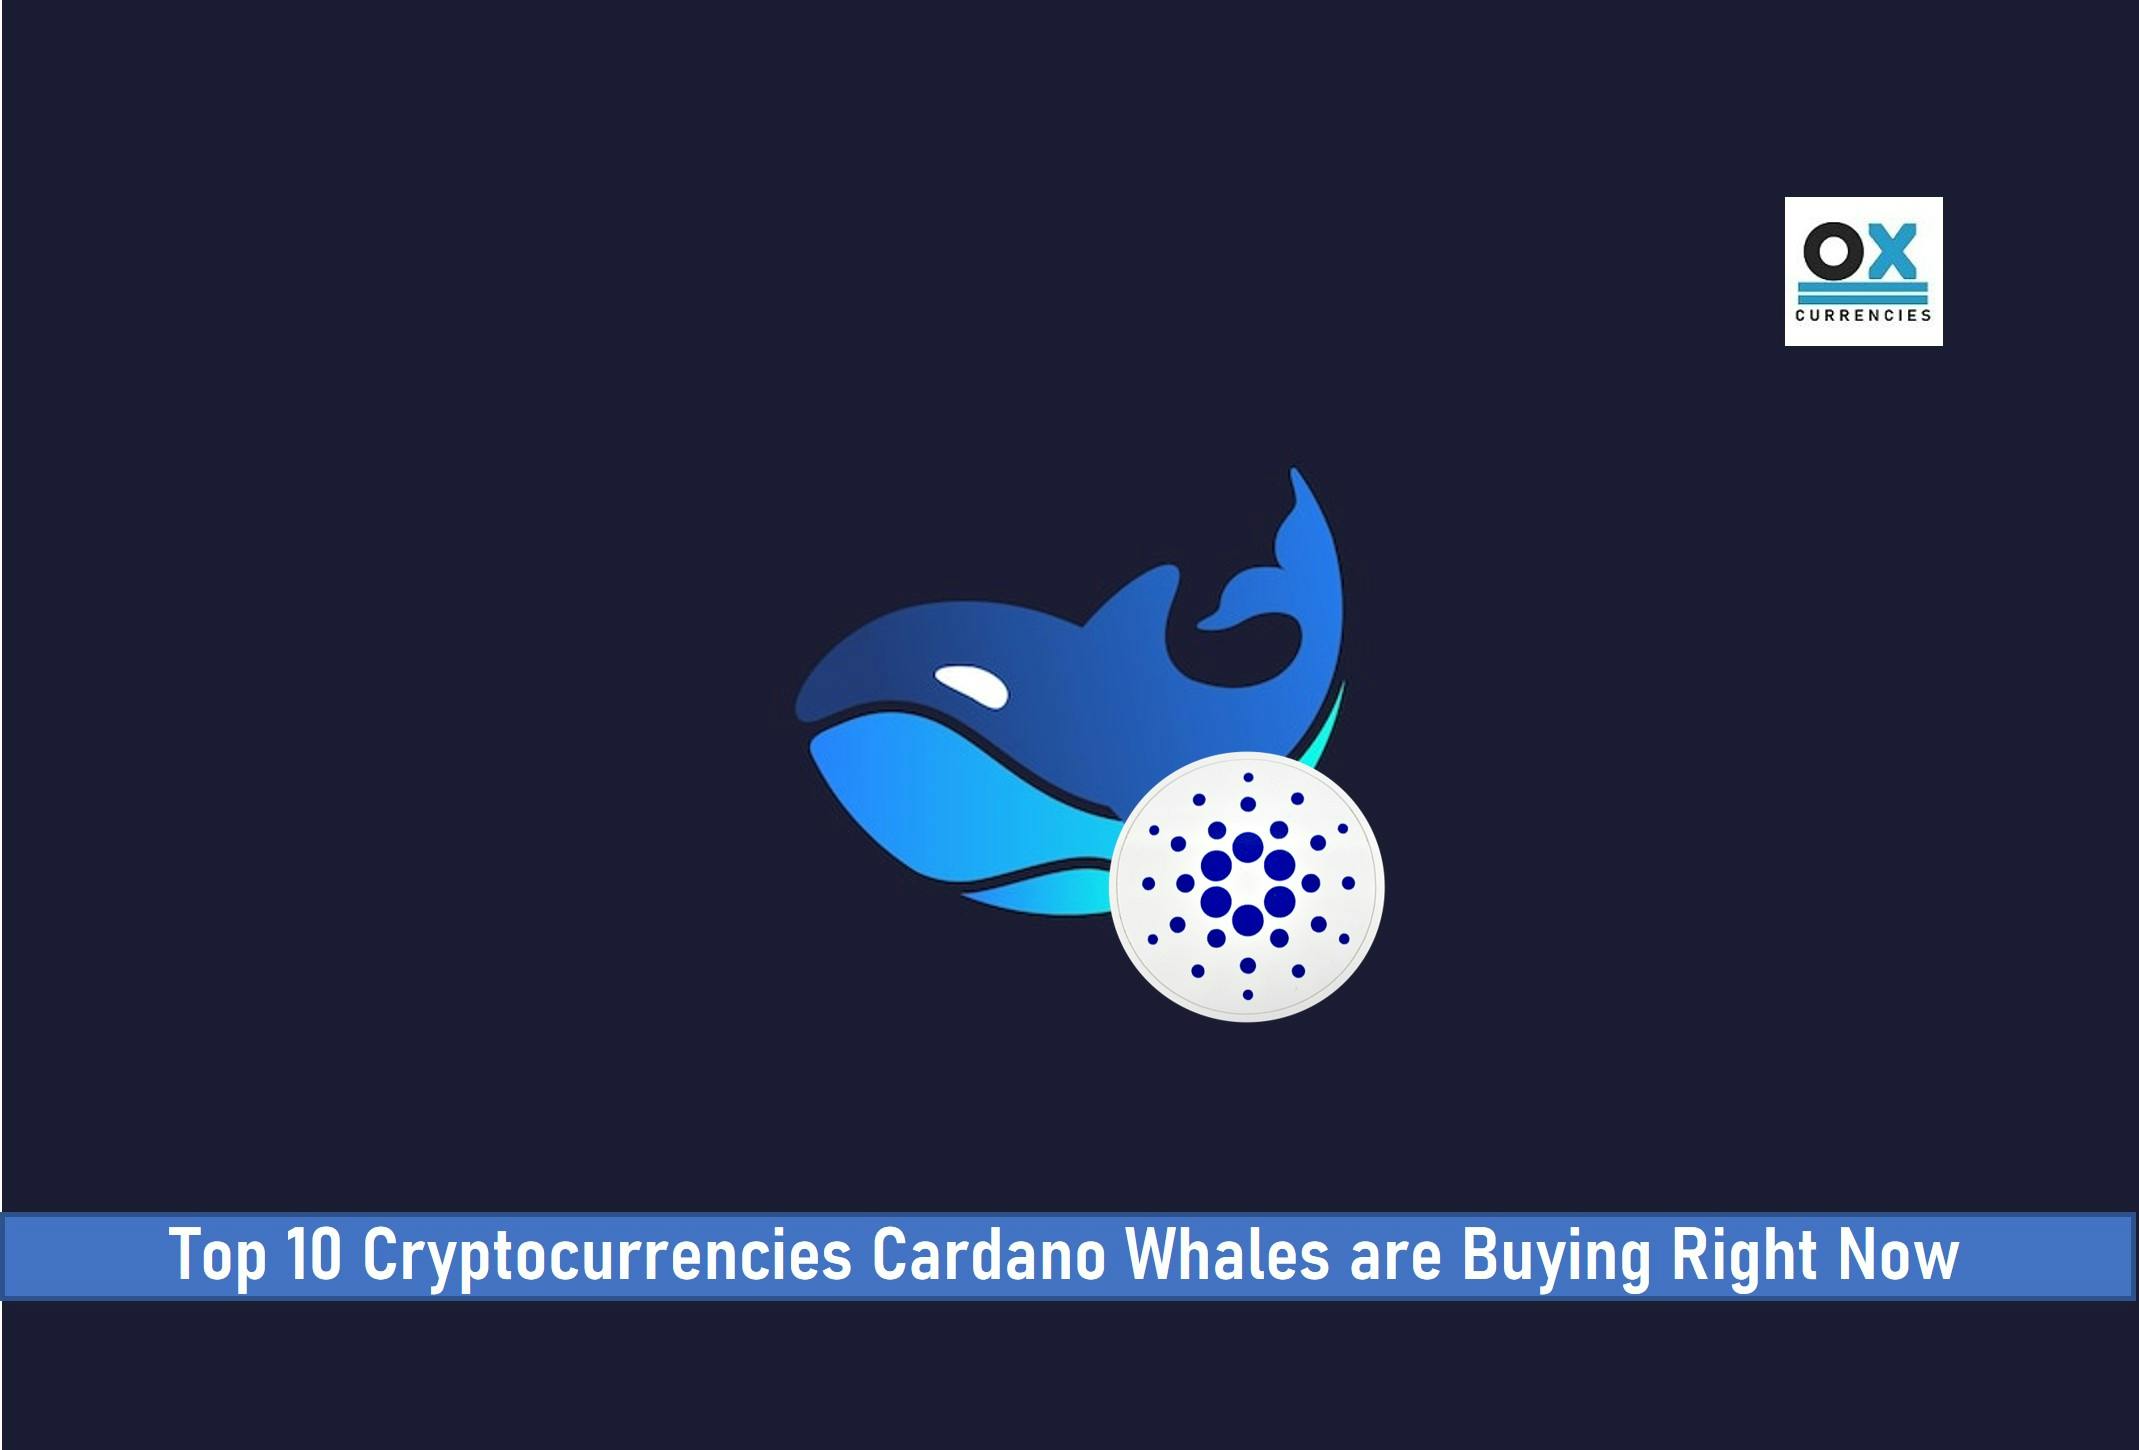 Top 10 Cryptocurrencies Cardano Whales are Buying right now